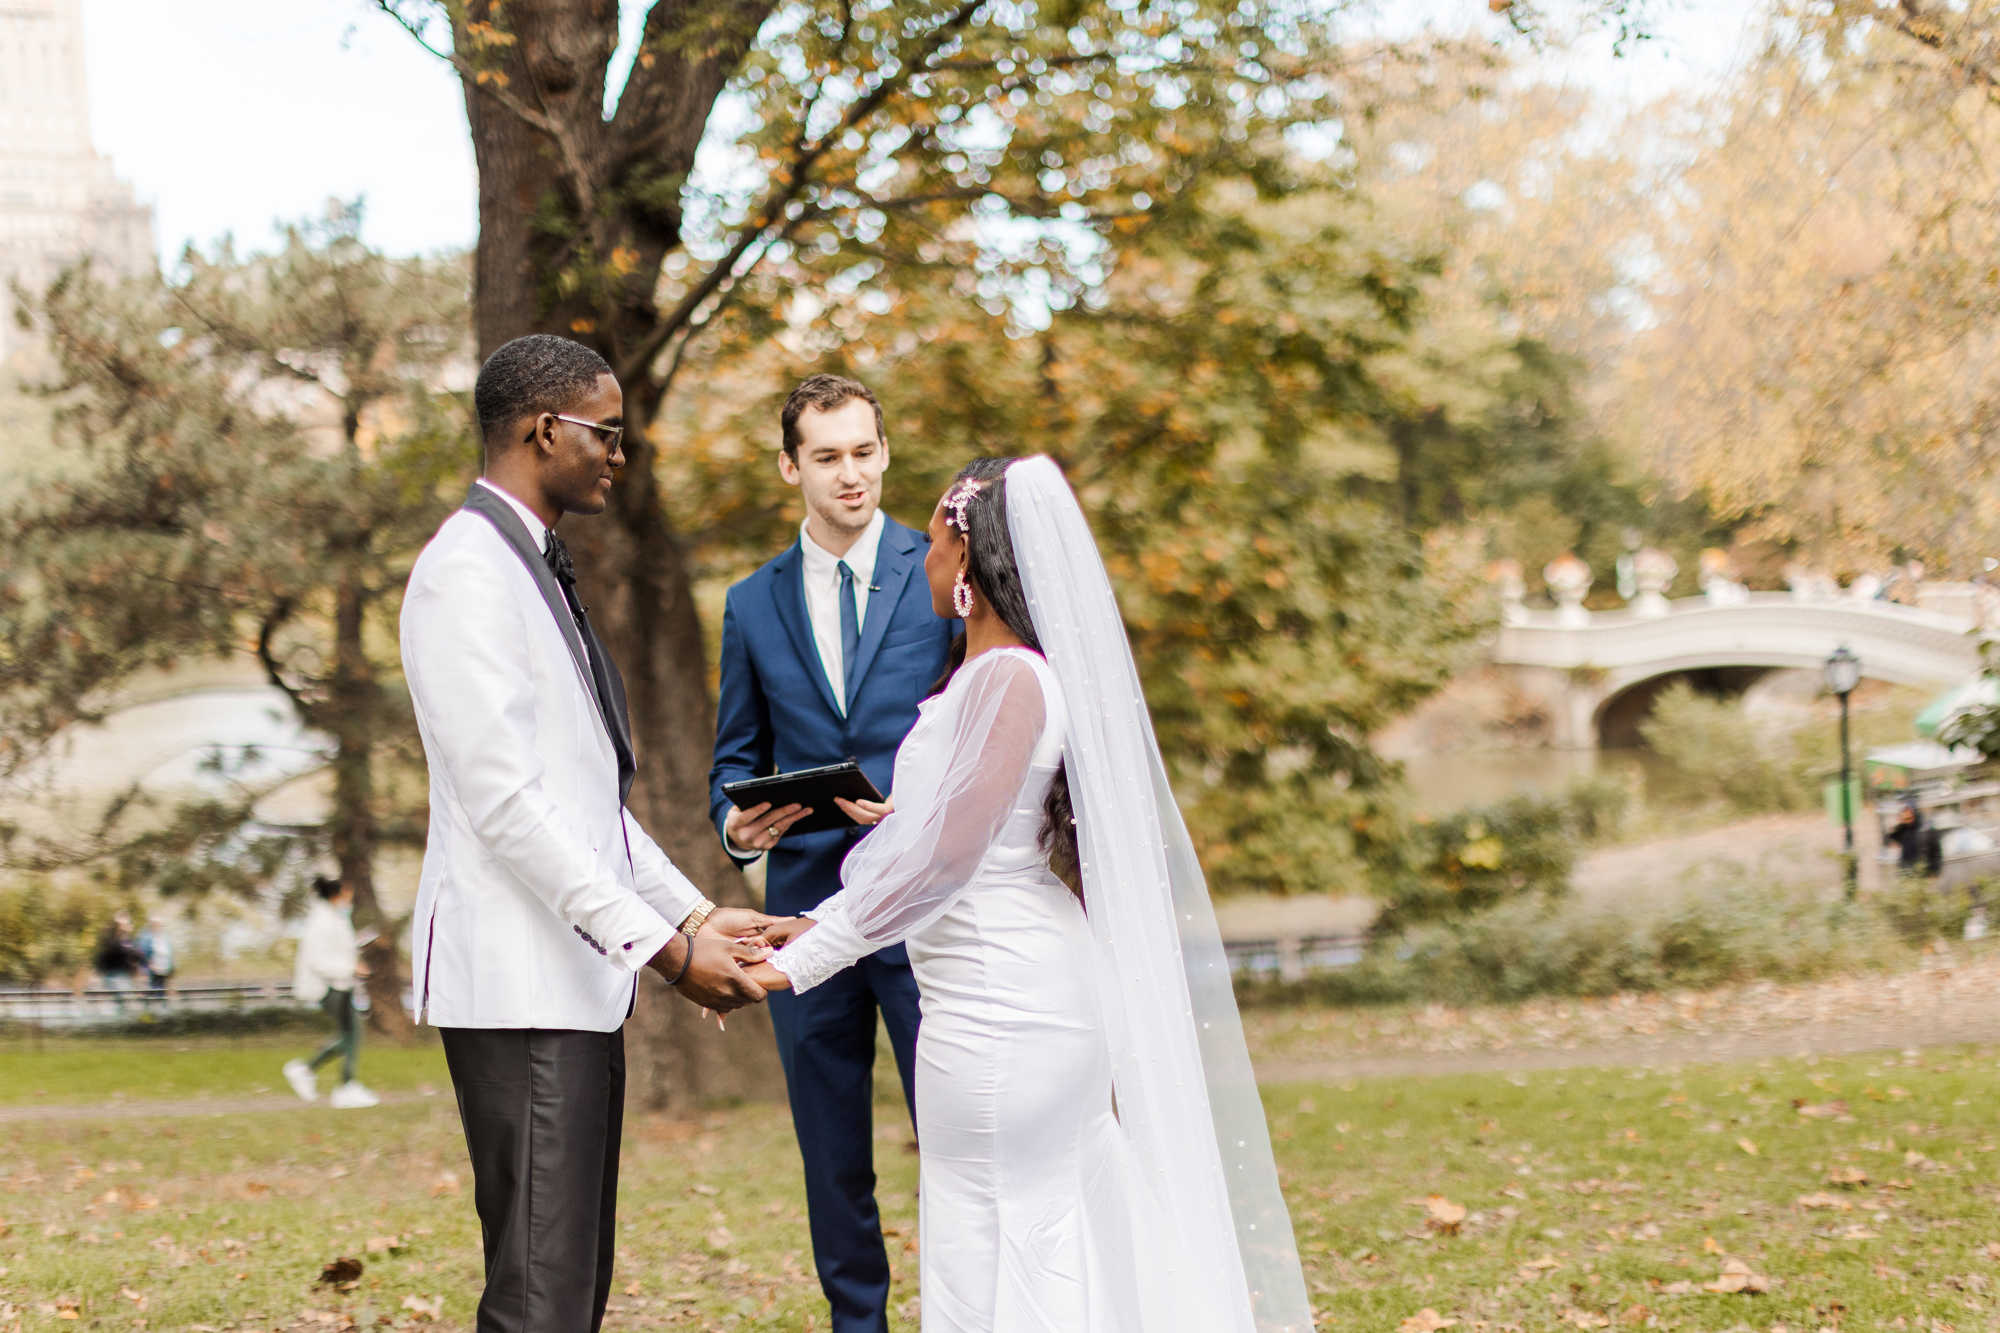 Picturesque Central Park Wedding Photos on Cherry Hill in Fall